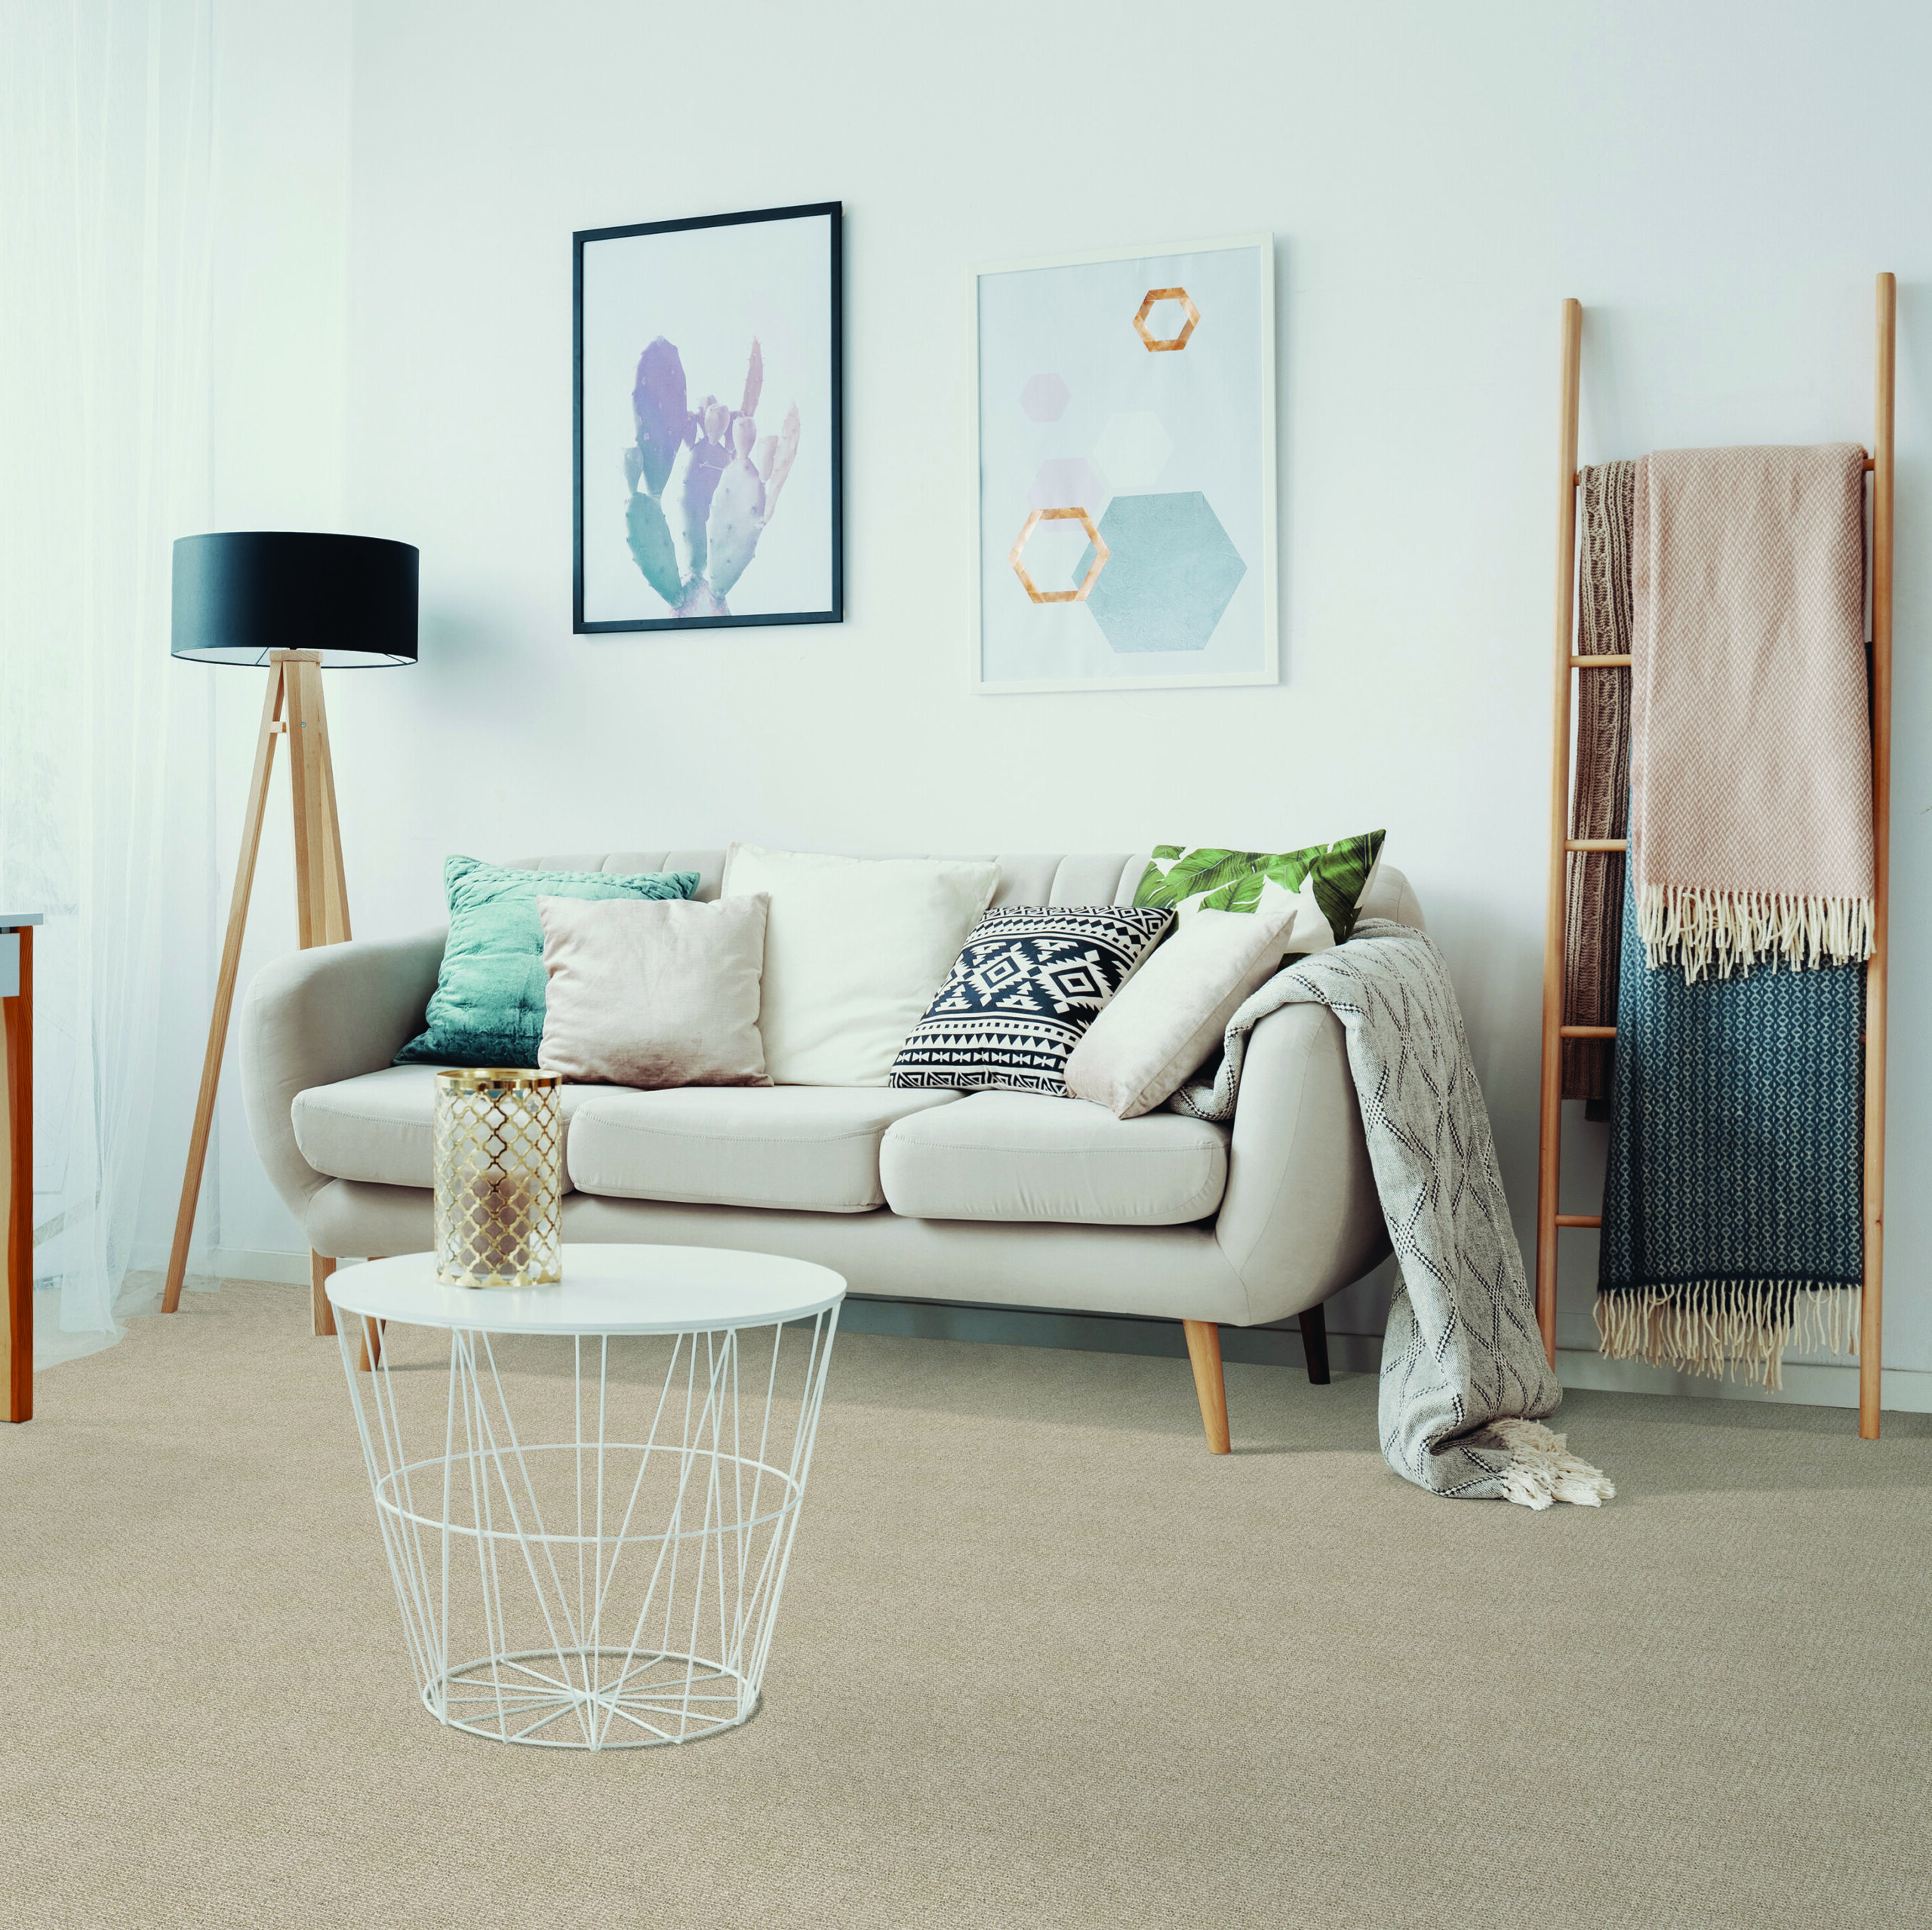 Carpet made by Beaulieu in Canada, showcased in a modern living room with a light couch, accent pillows and sand-coloured carpet.